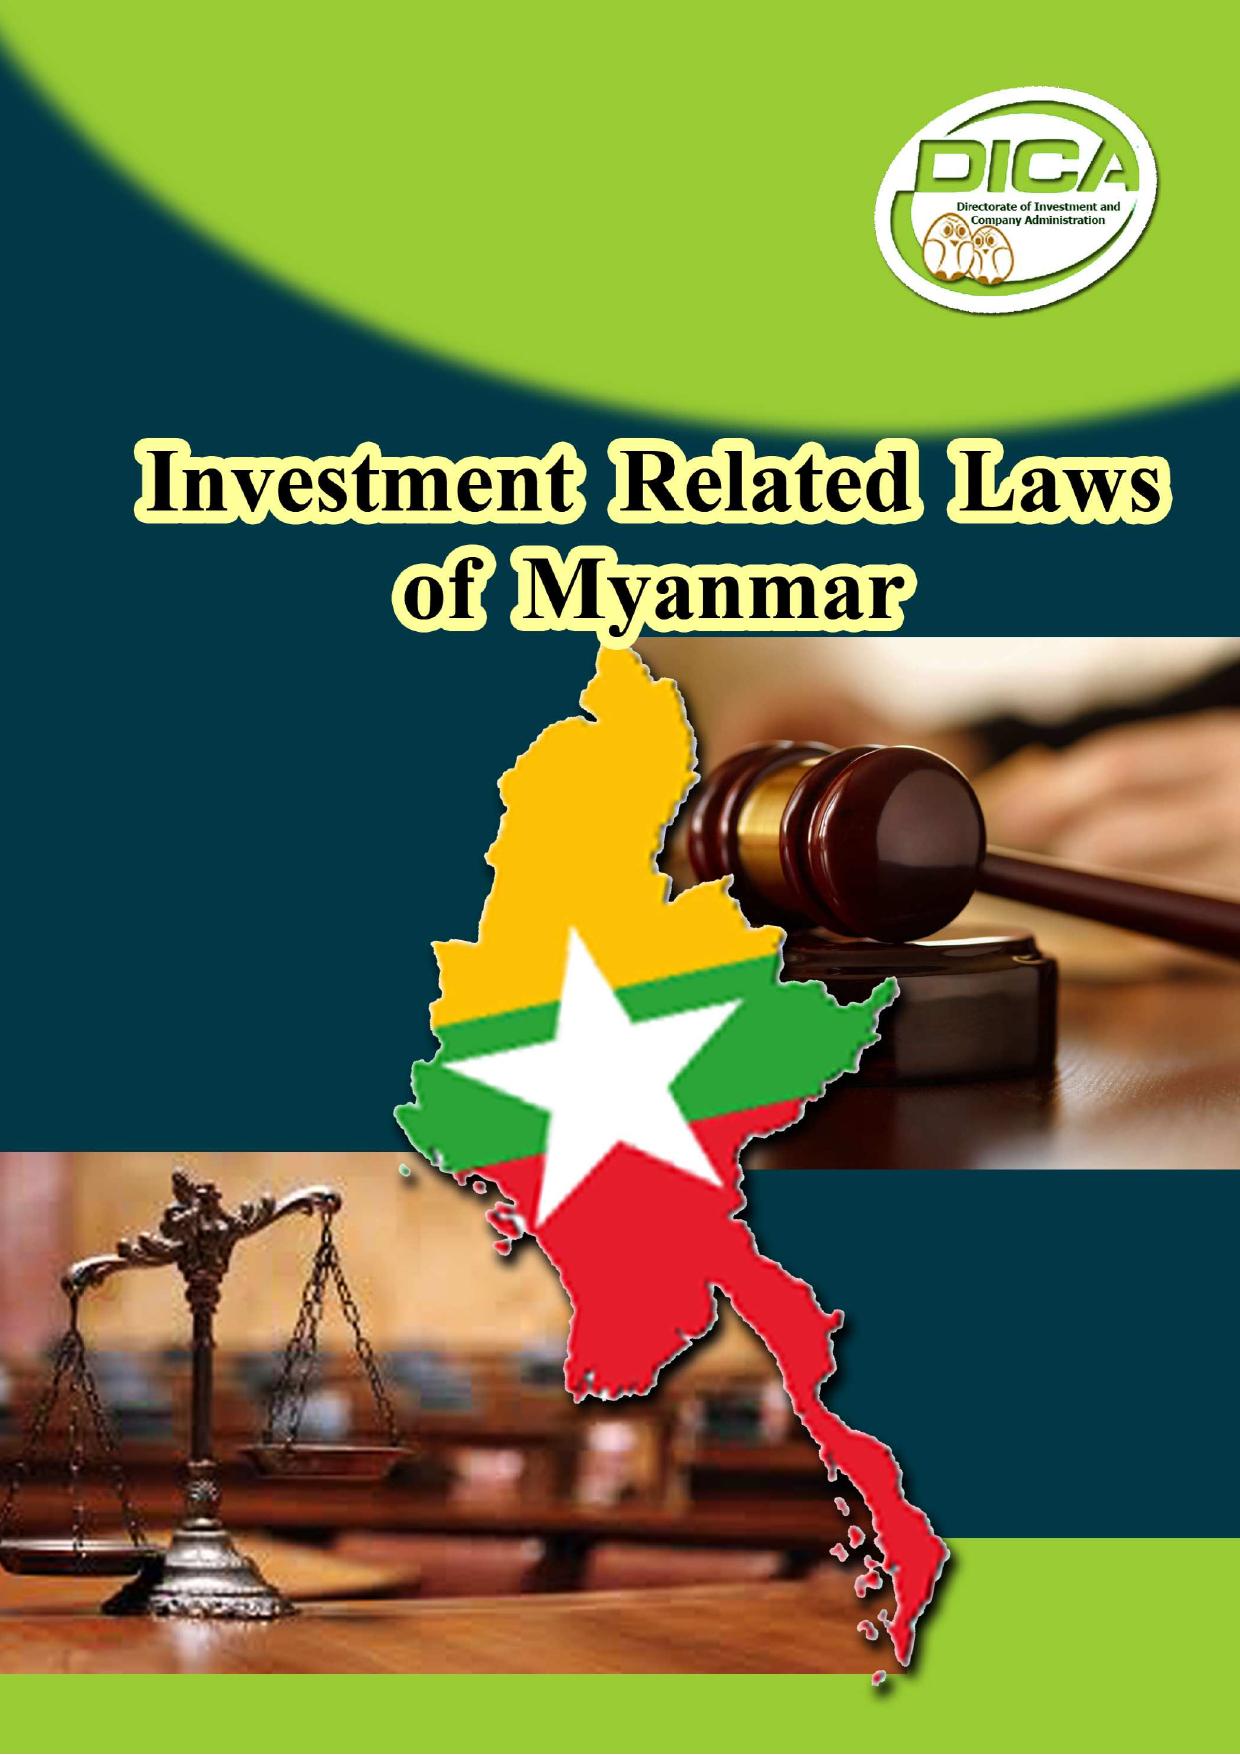 Investment Related Laws 2017